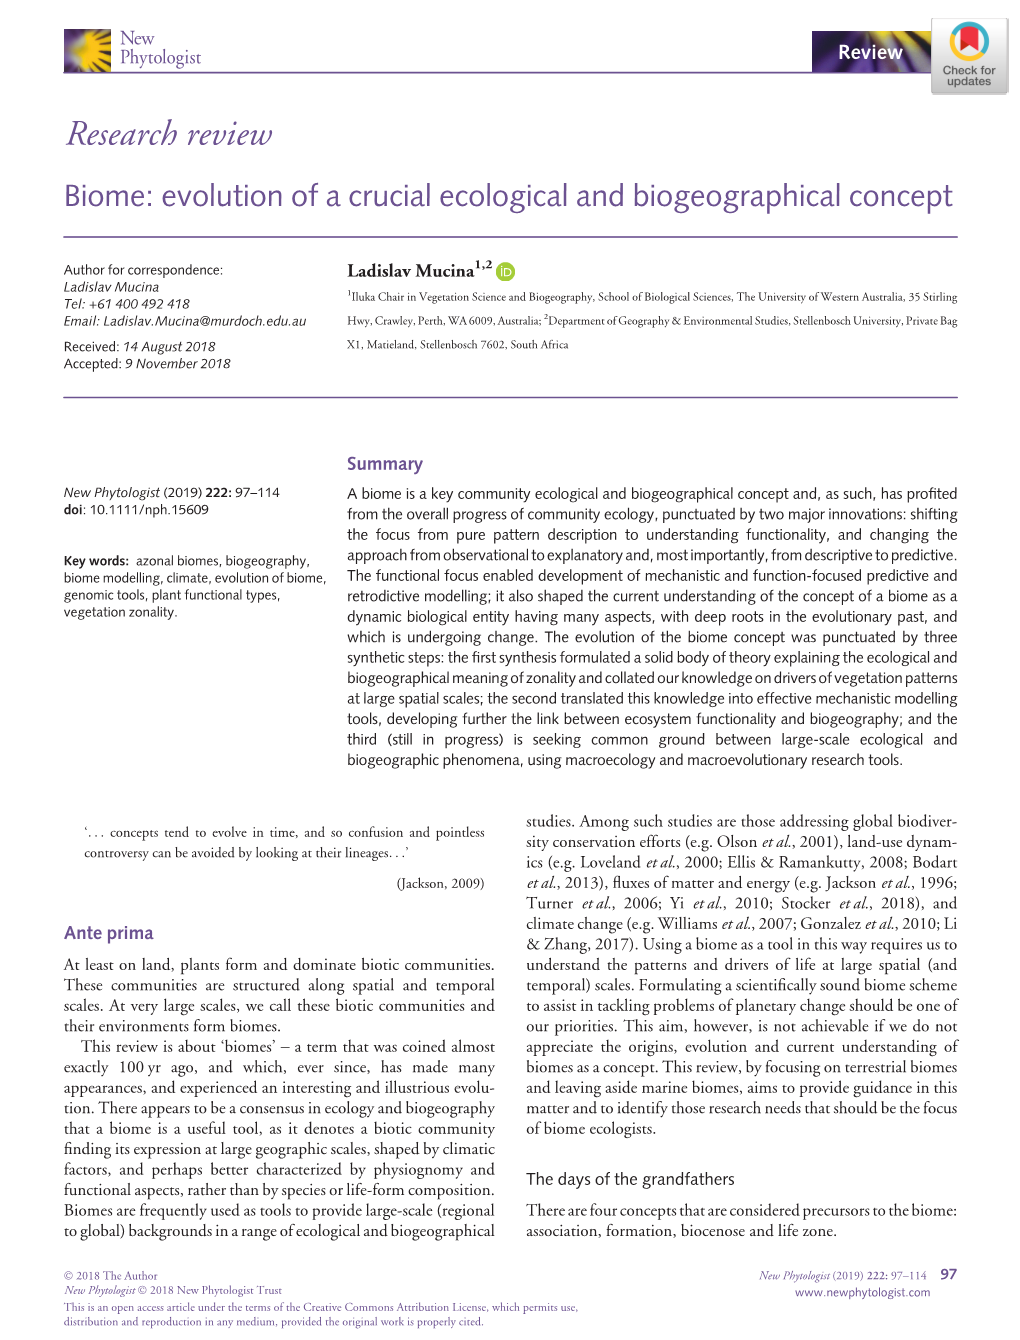 Biome: Evolution of a Crucial Ecological and Biogeographical Concept